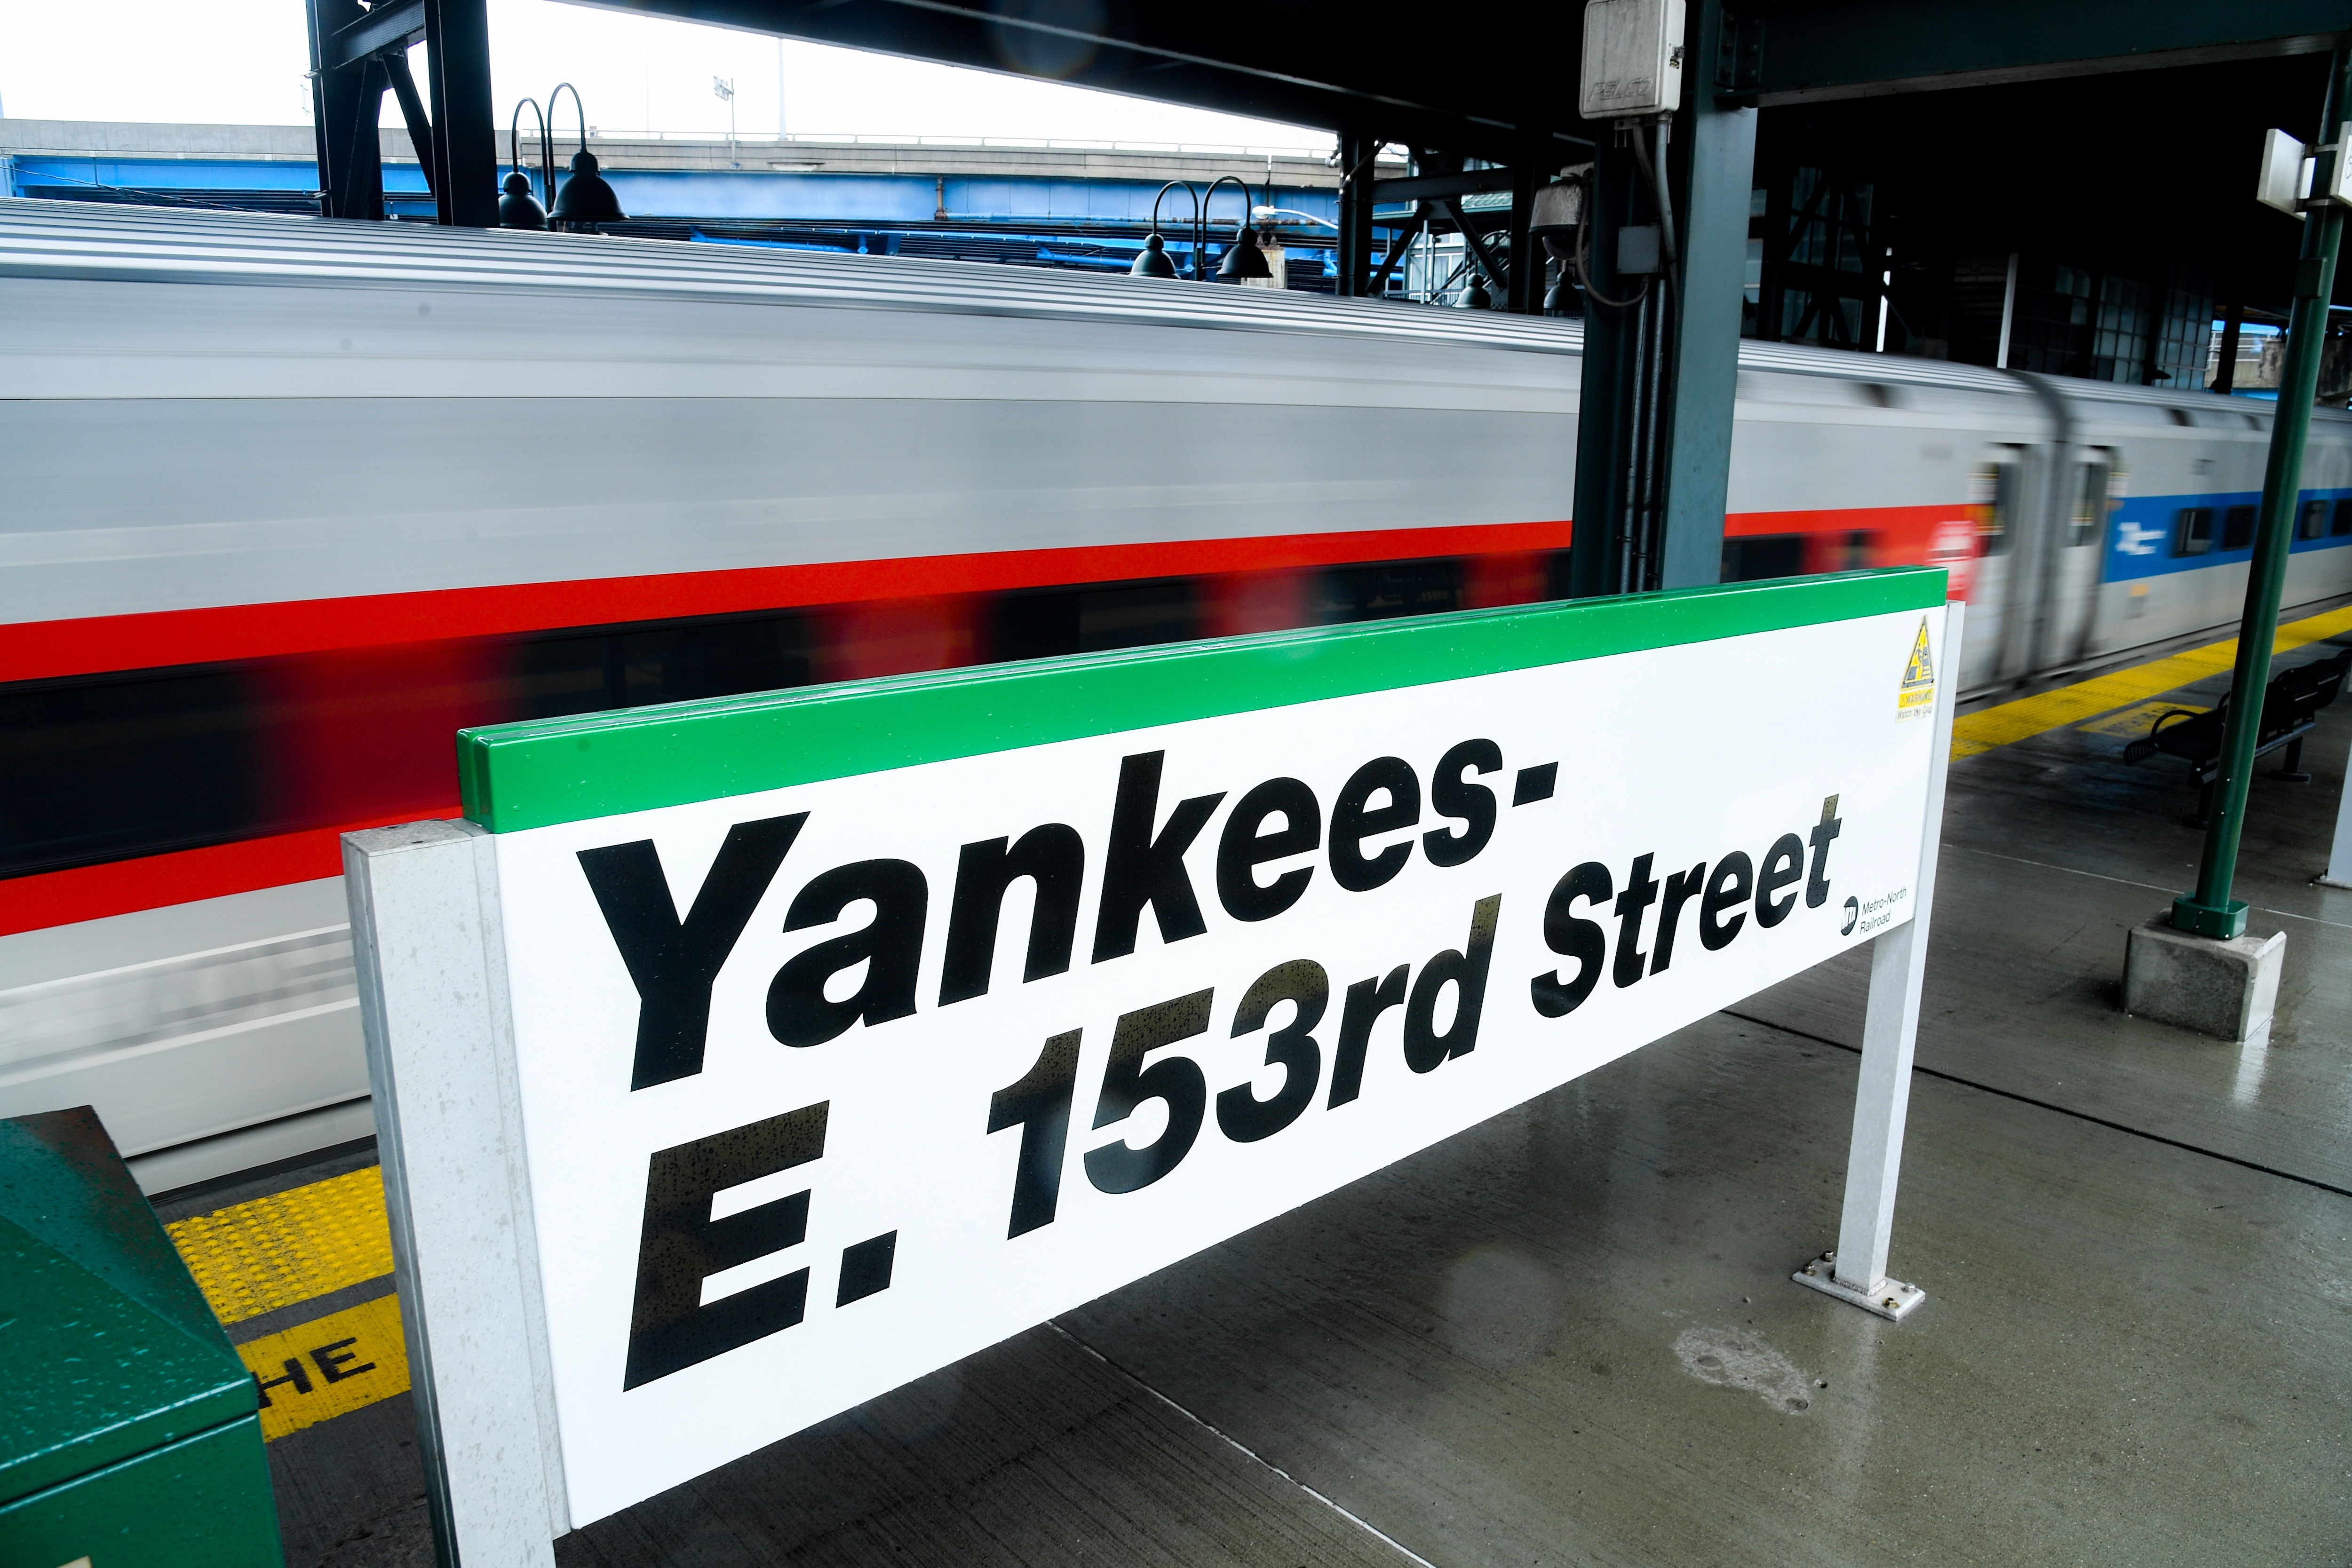 With Postseason Baseball Back in New York, the MTA is the Best Way to Take You Out to the Ballgame to Root for the Mets and Yankees